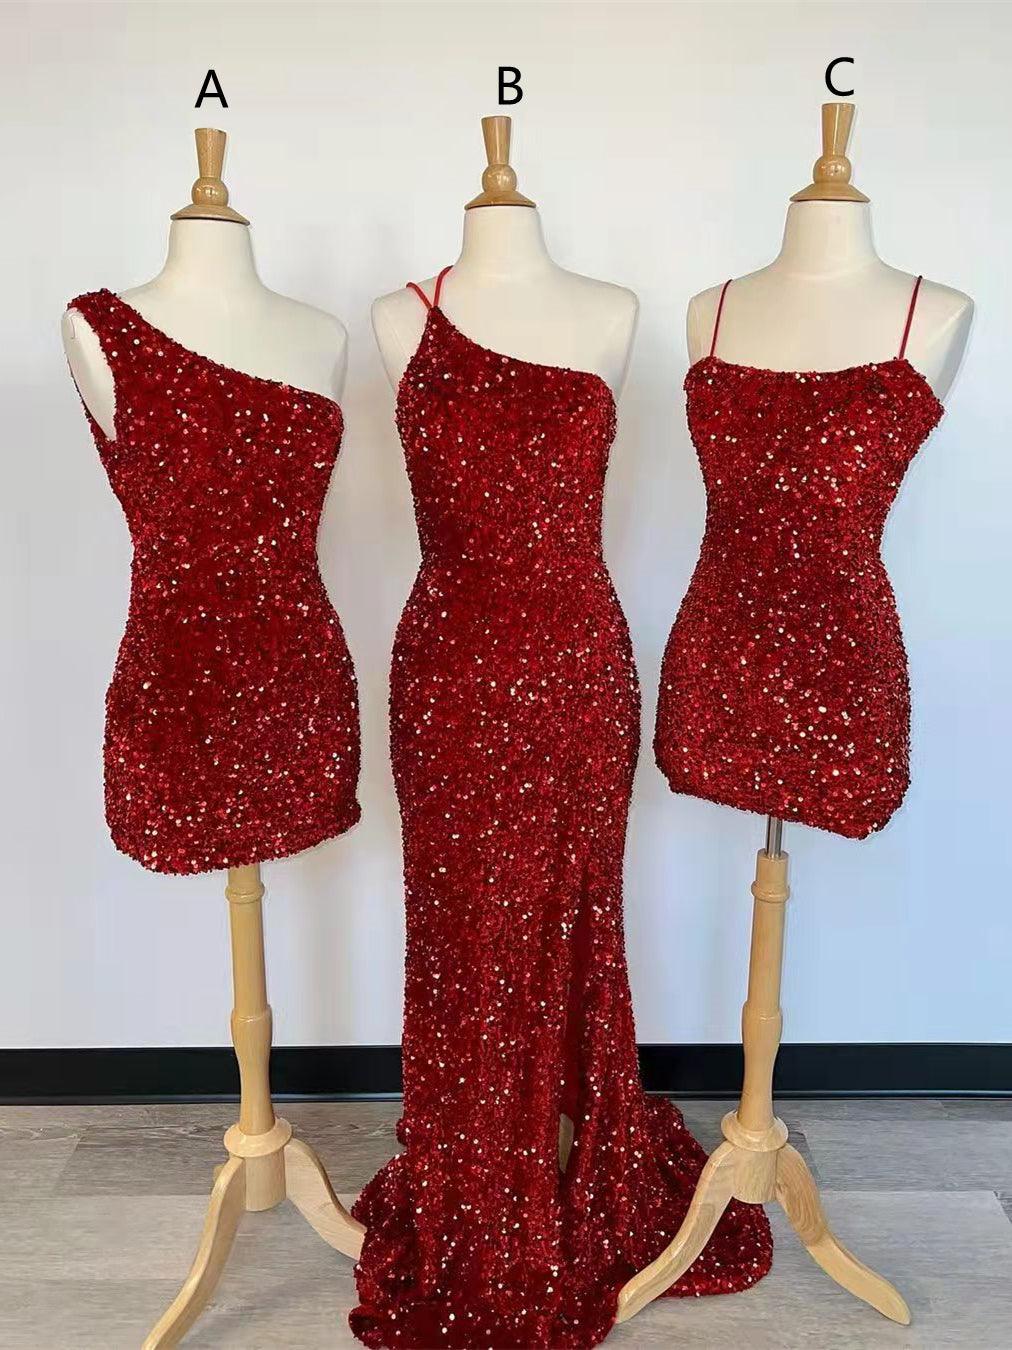 Mismatched Red Sequin Prom Dresses, Bridesmaid Dresses, Mermaid Prom Dresses, 2022 Prom Dresses, Shiny Prom Dresses, RC023 - RongMoon